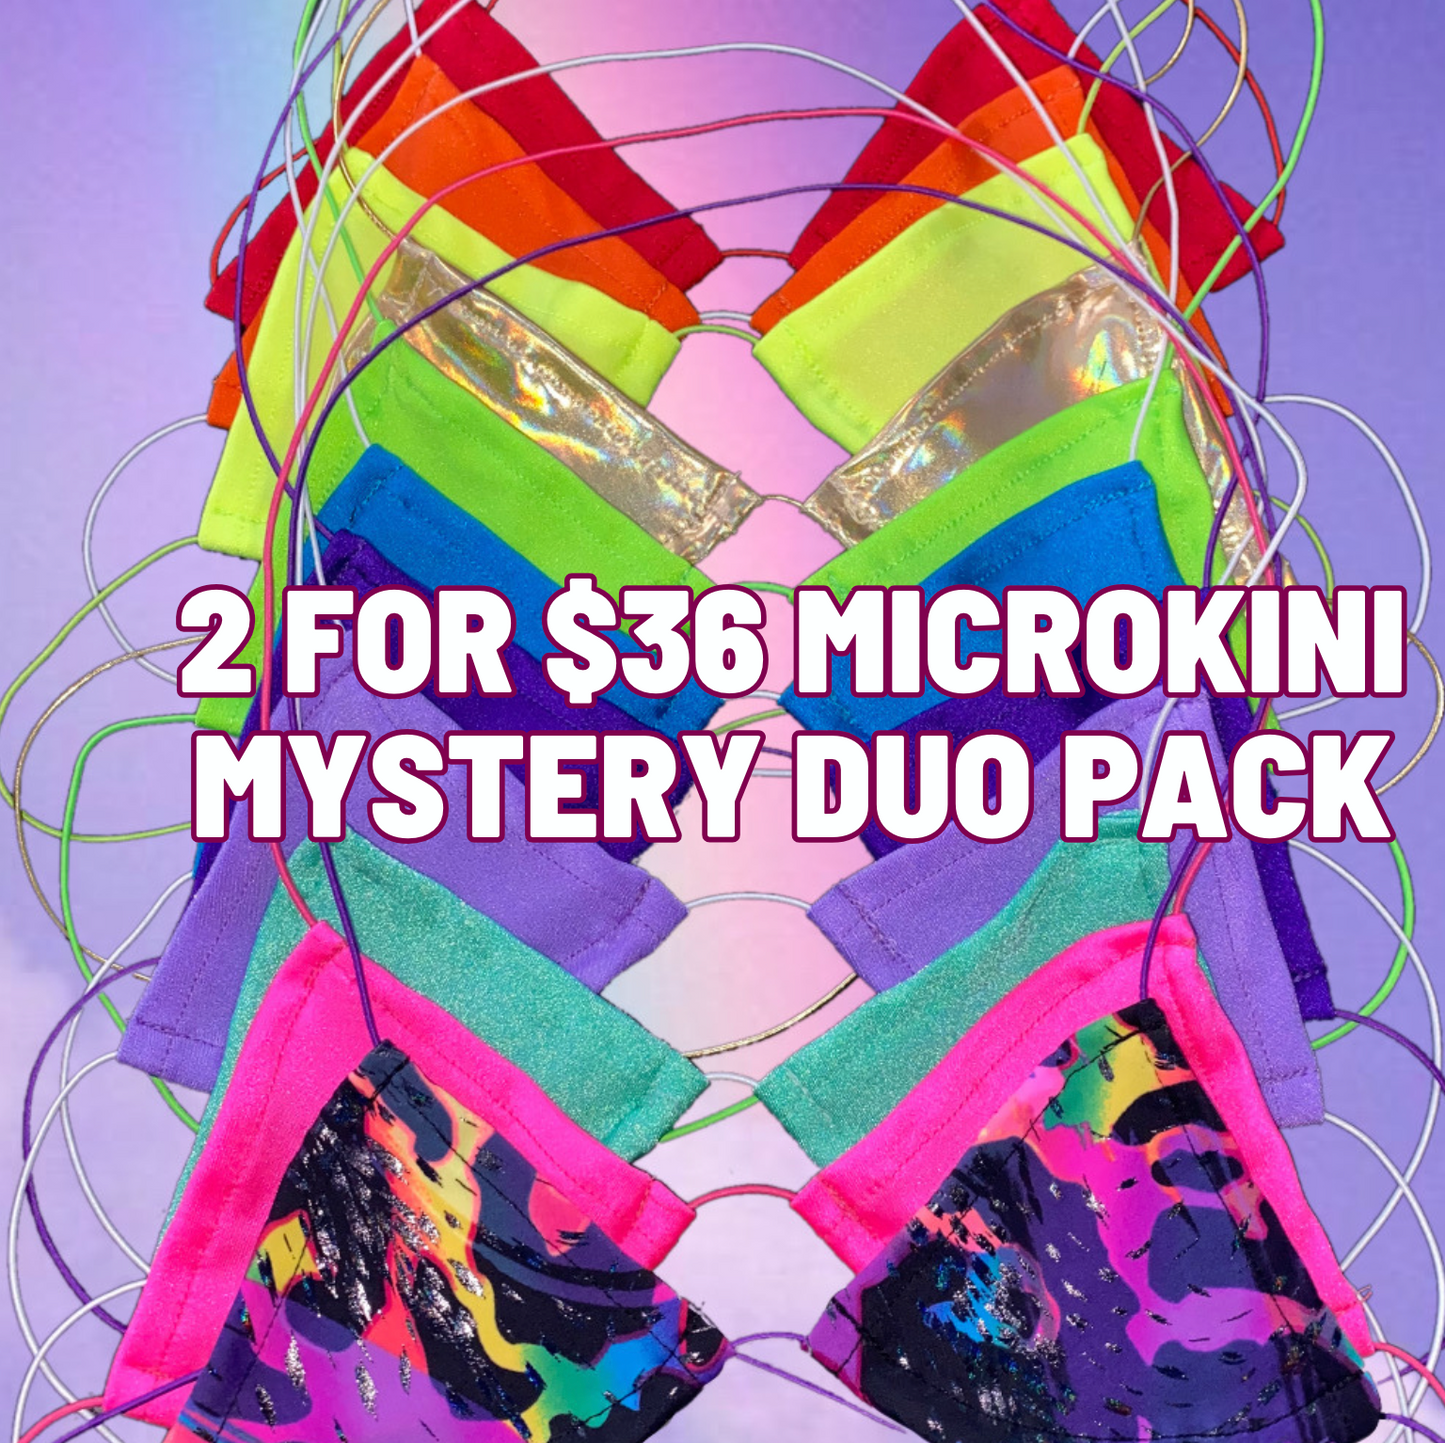 2 FOR $36 MICROKINI MYSTERY DUO PACK